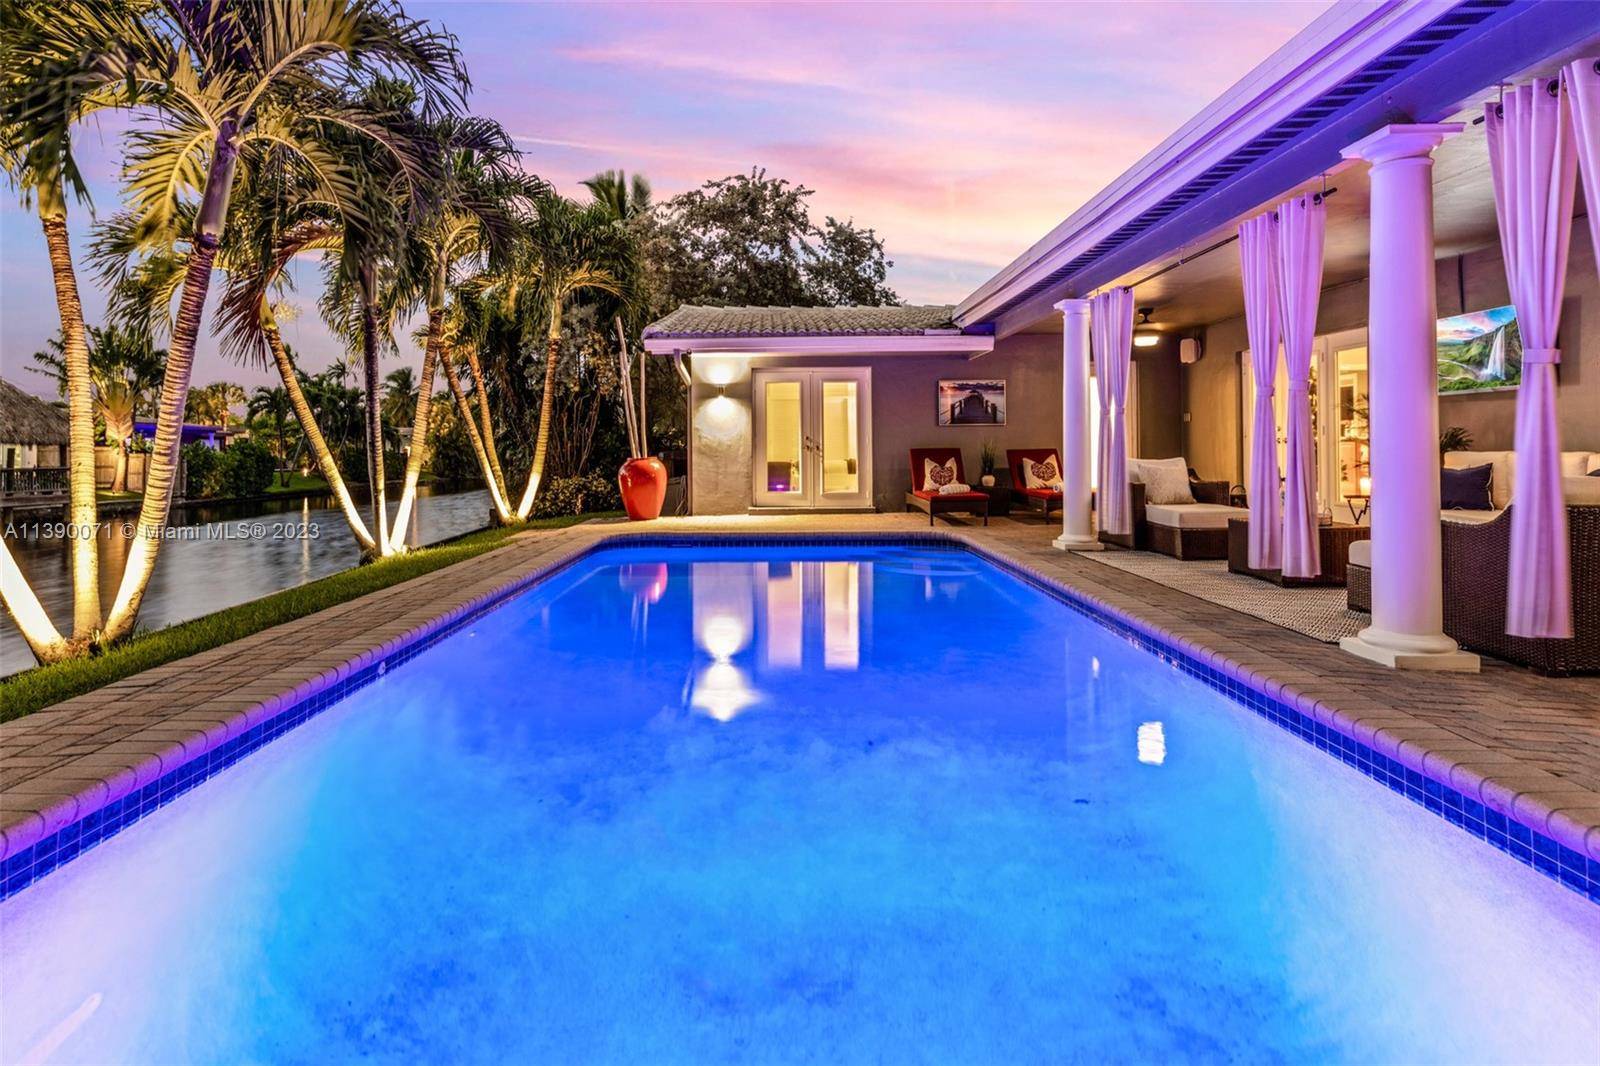 Nourish your soul at this gorgeous waterfront villa in the heart of Oakland Park.